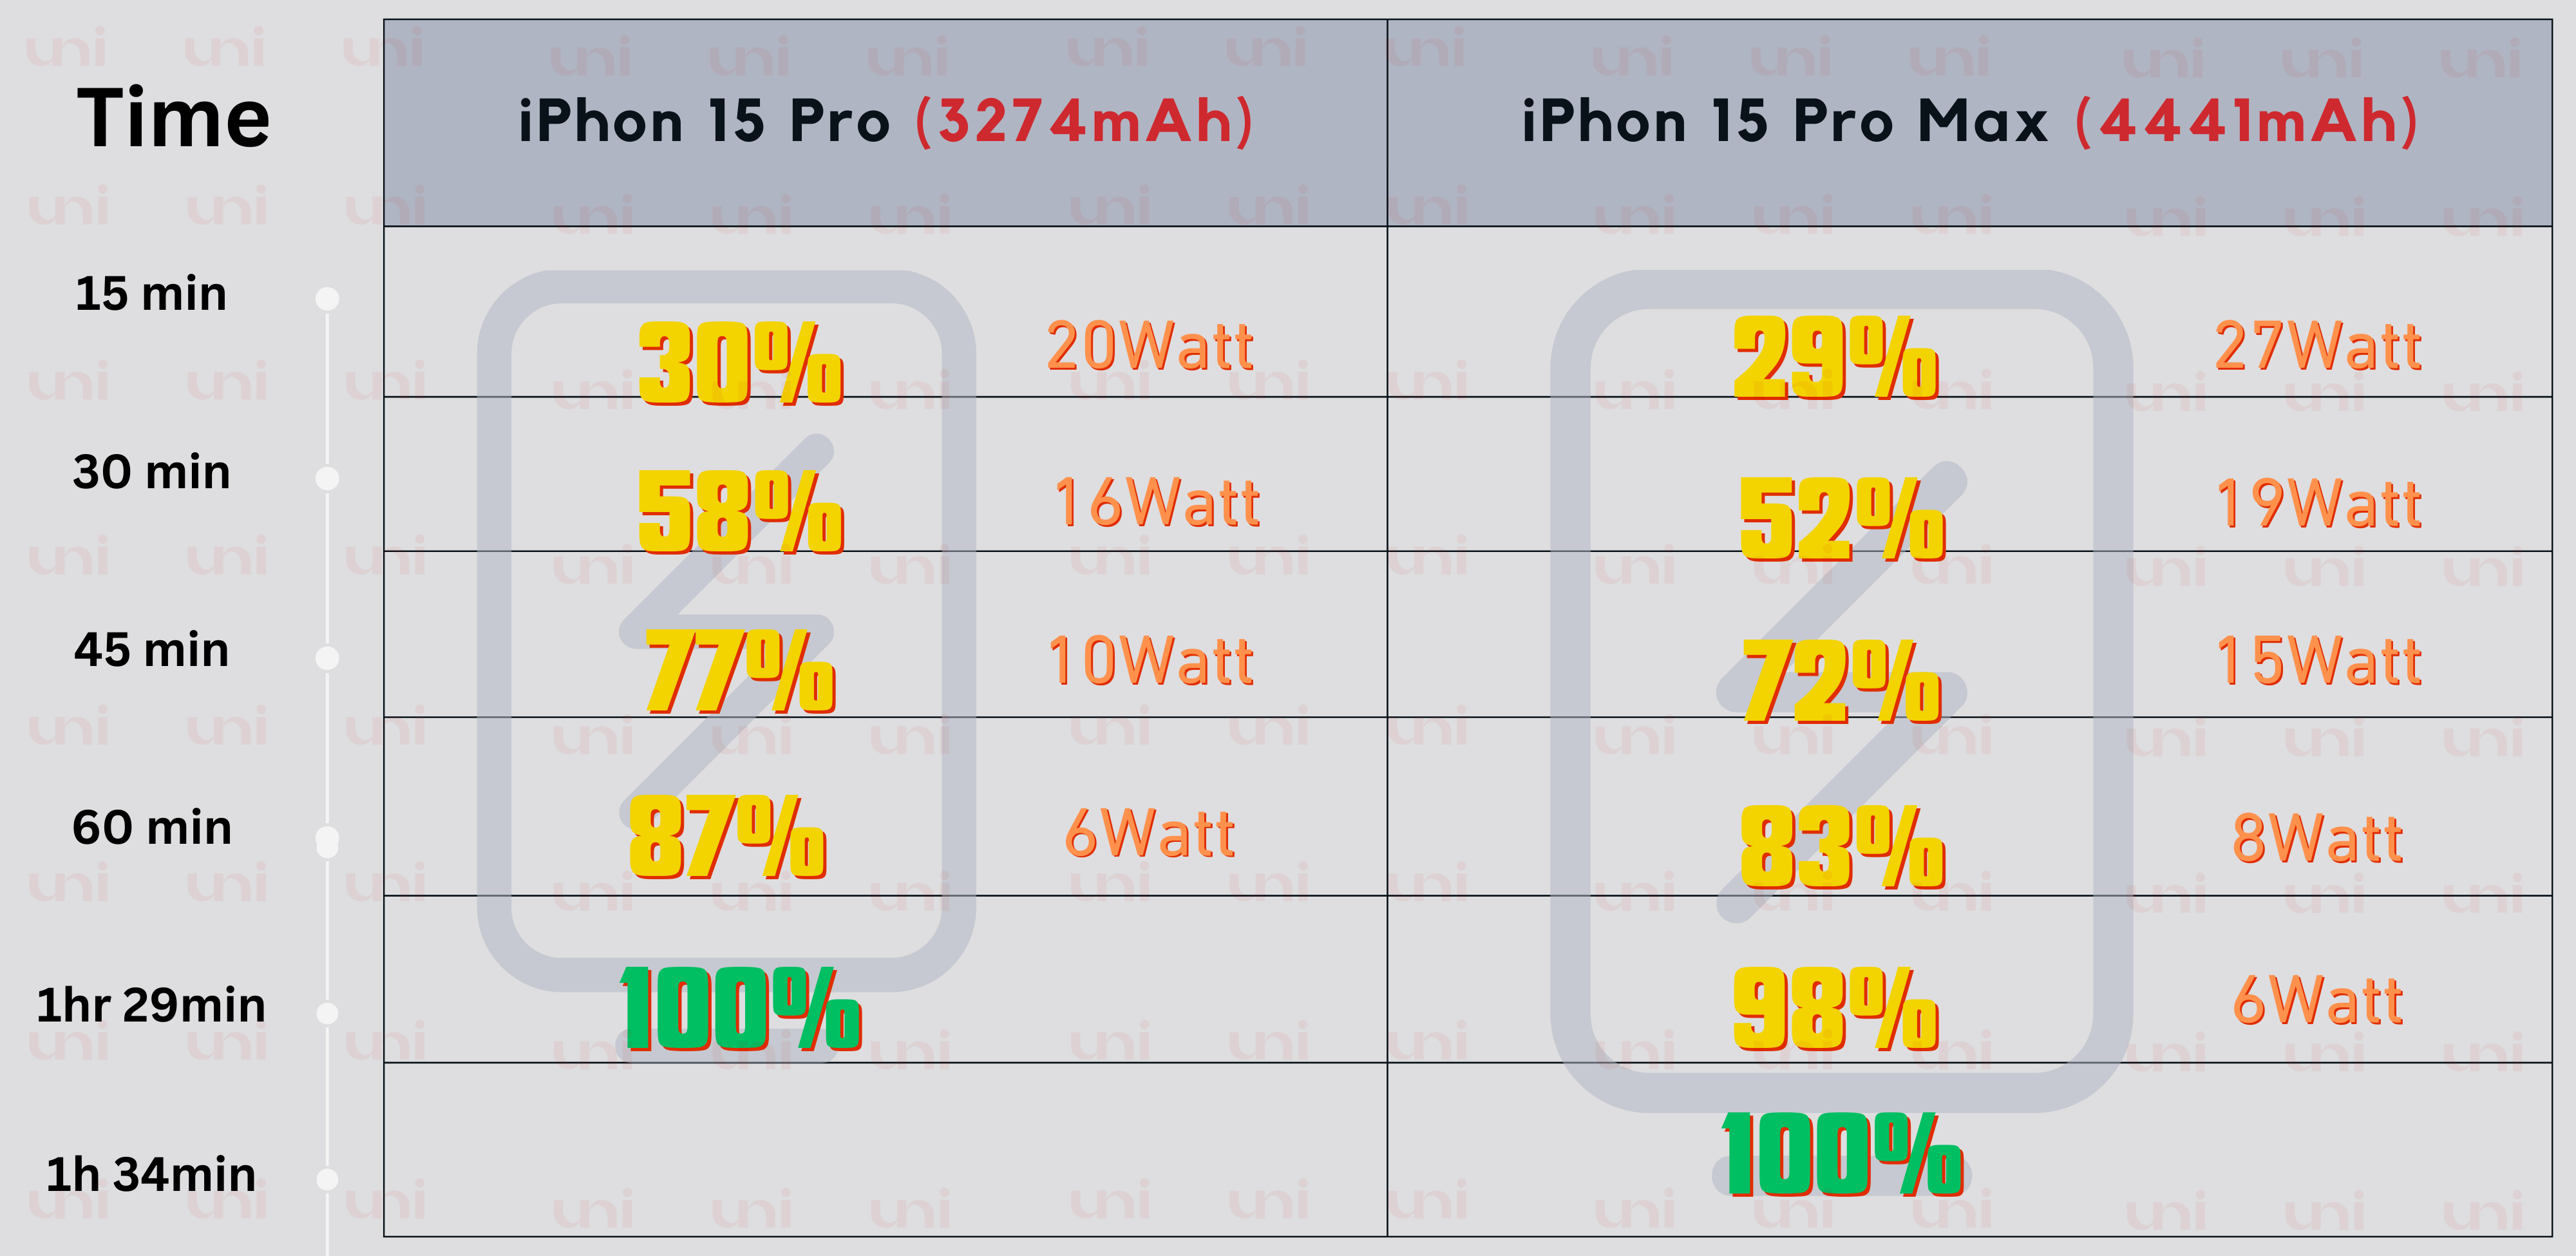 crux of our findings to make you aware of the charging time of  Pro and Pro Max models